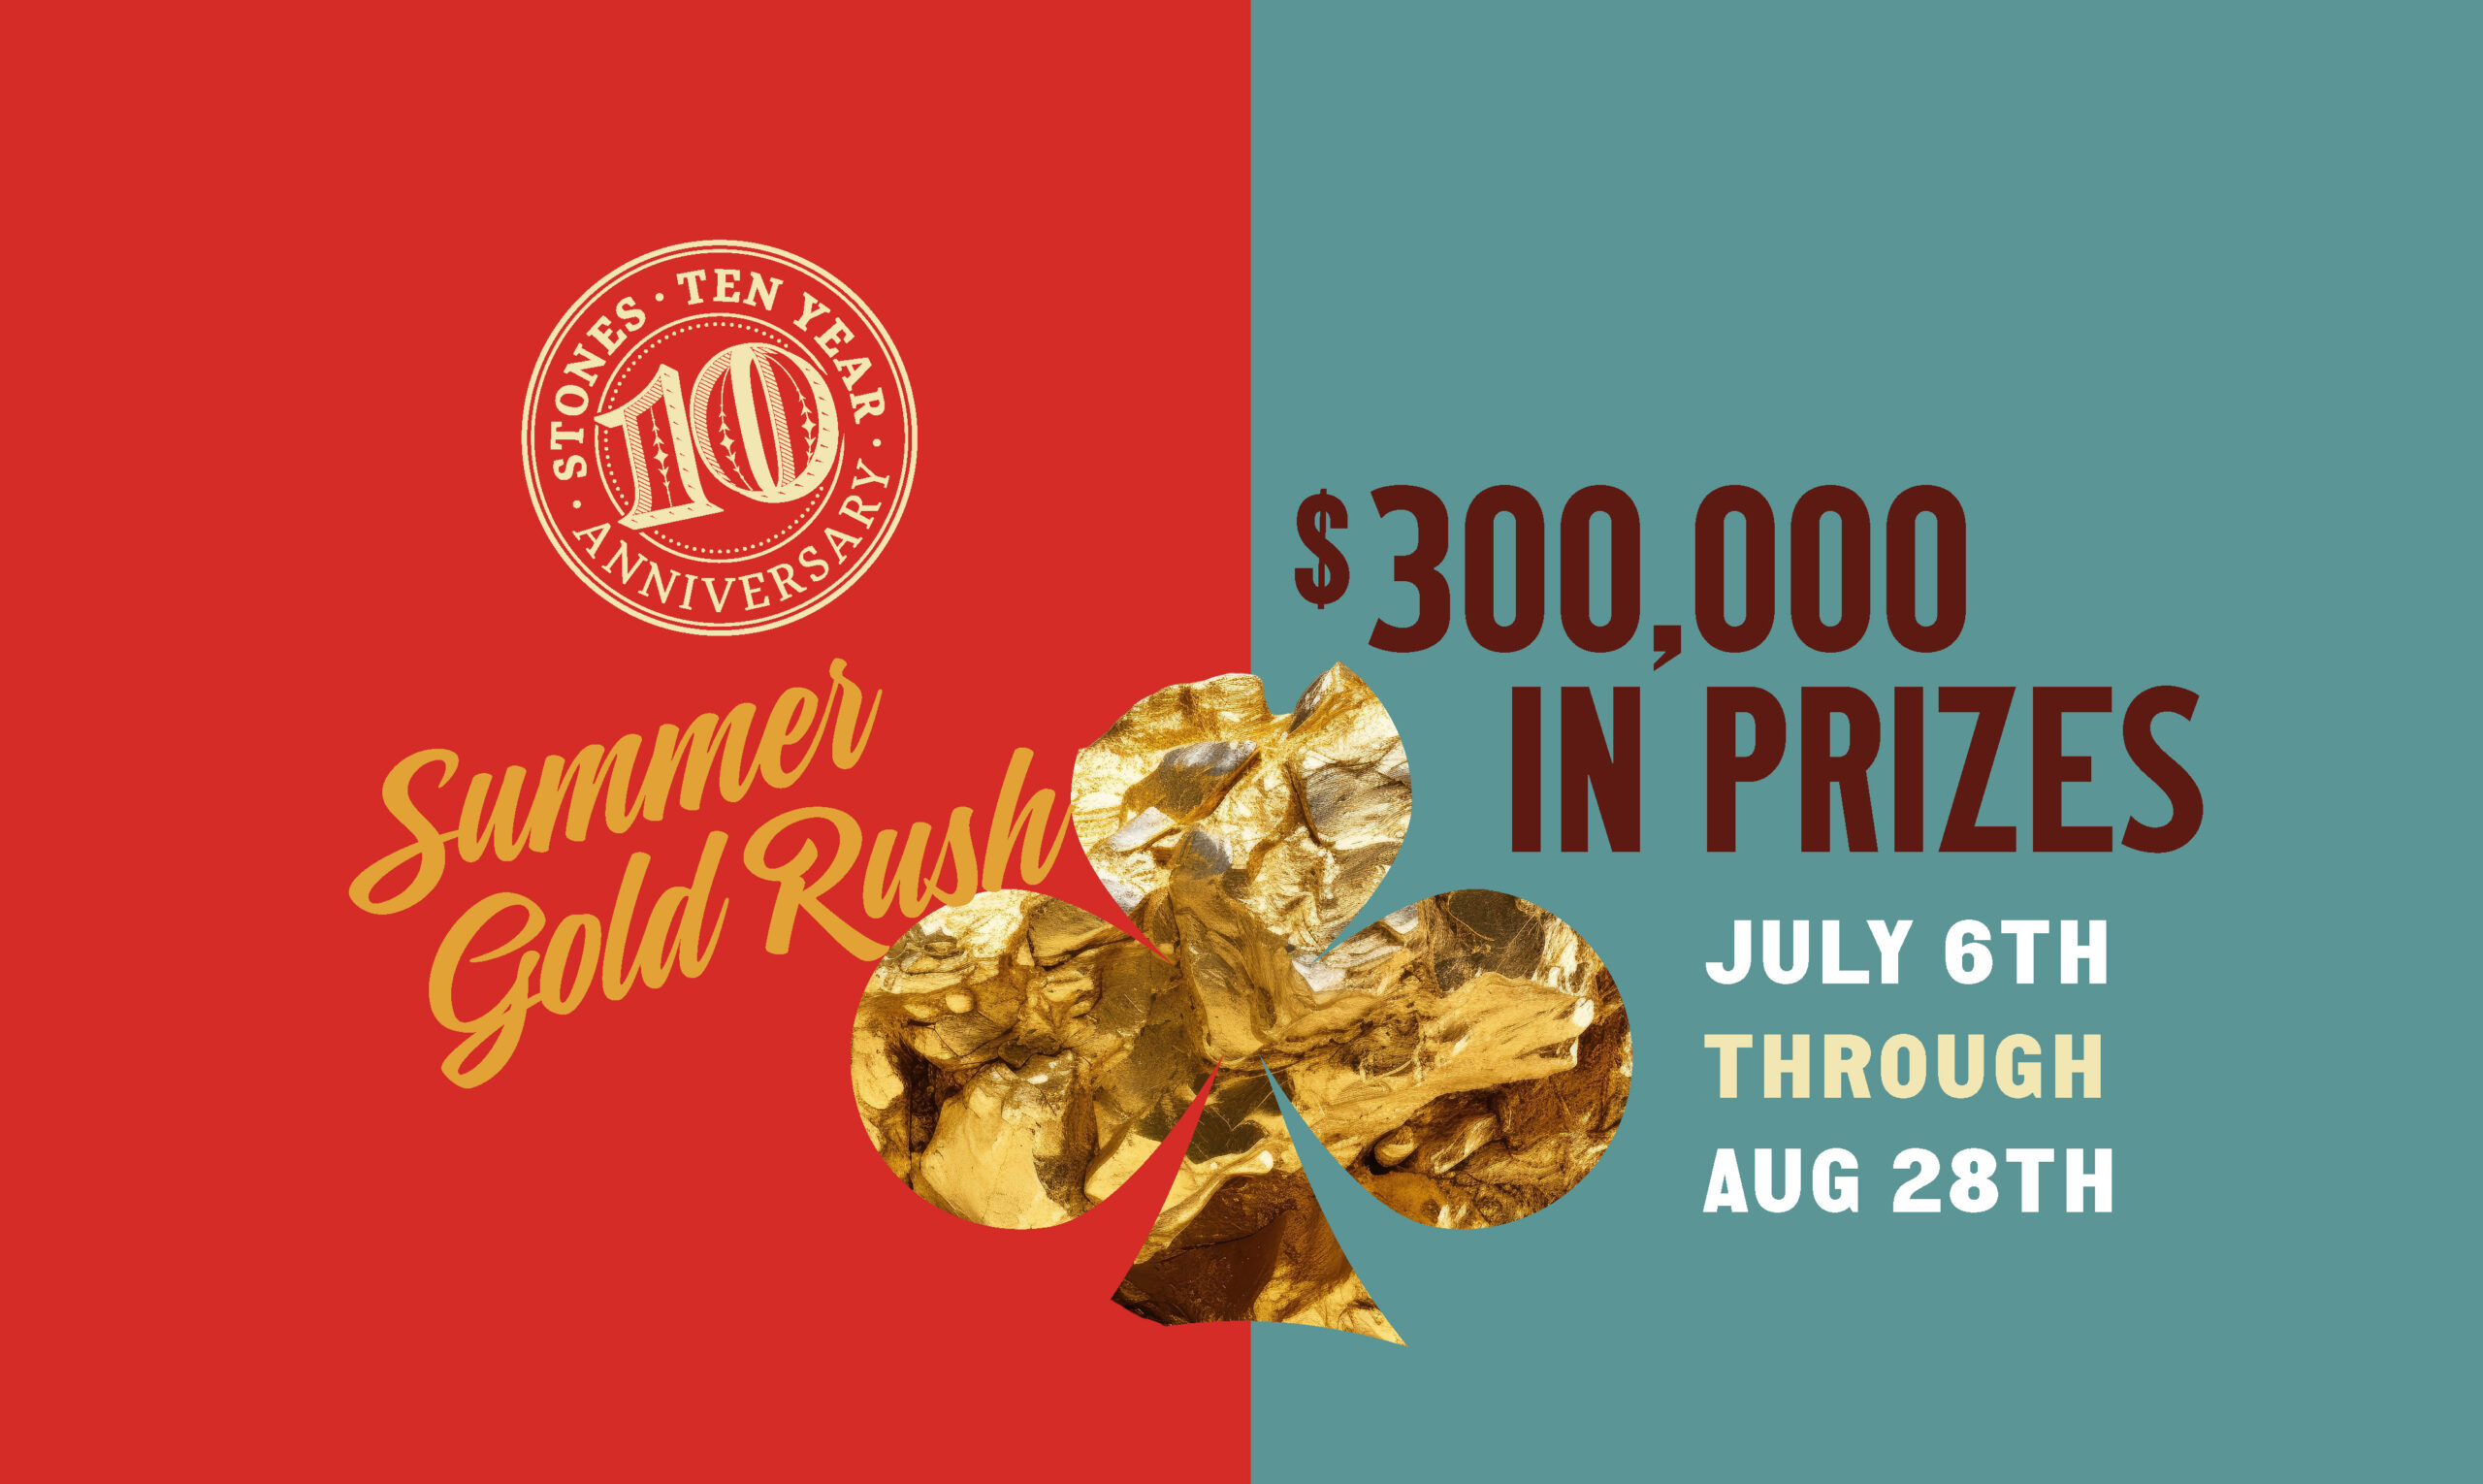 Stones 10 Year Anniversary Summer Gold Rush, $300,000 in Prizes July 6 through August 28